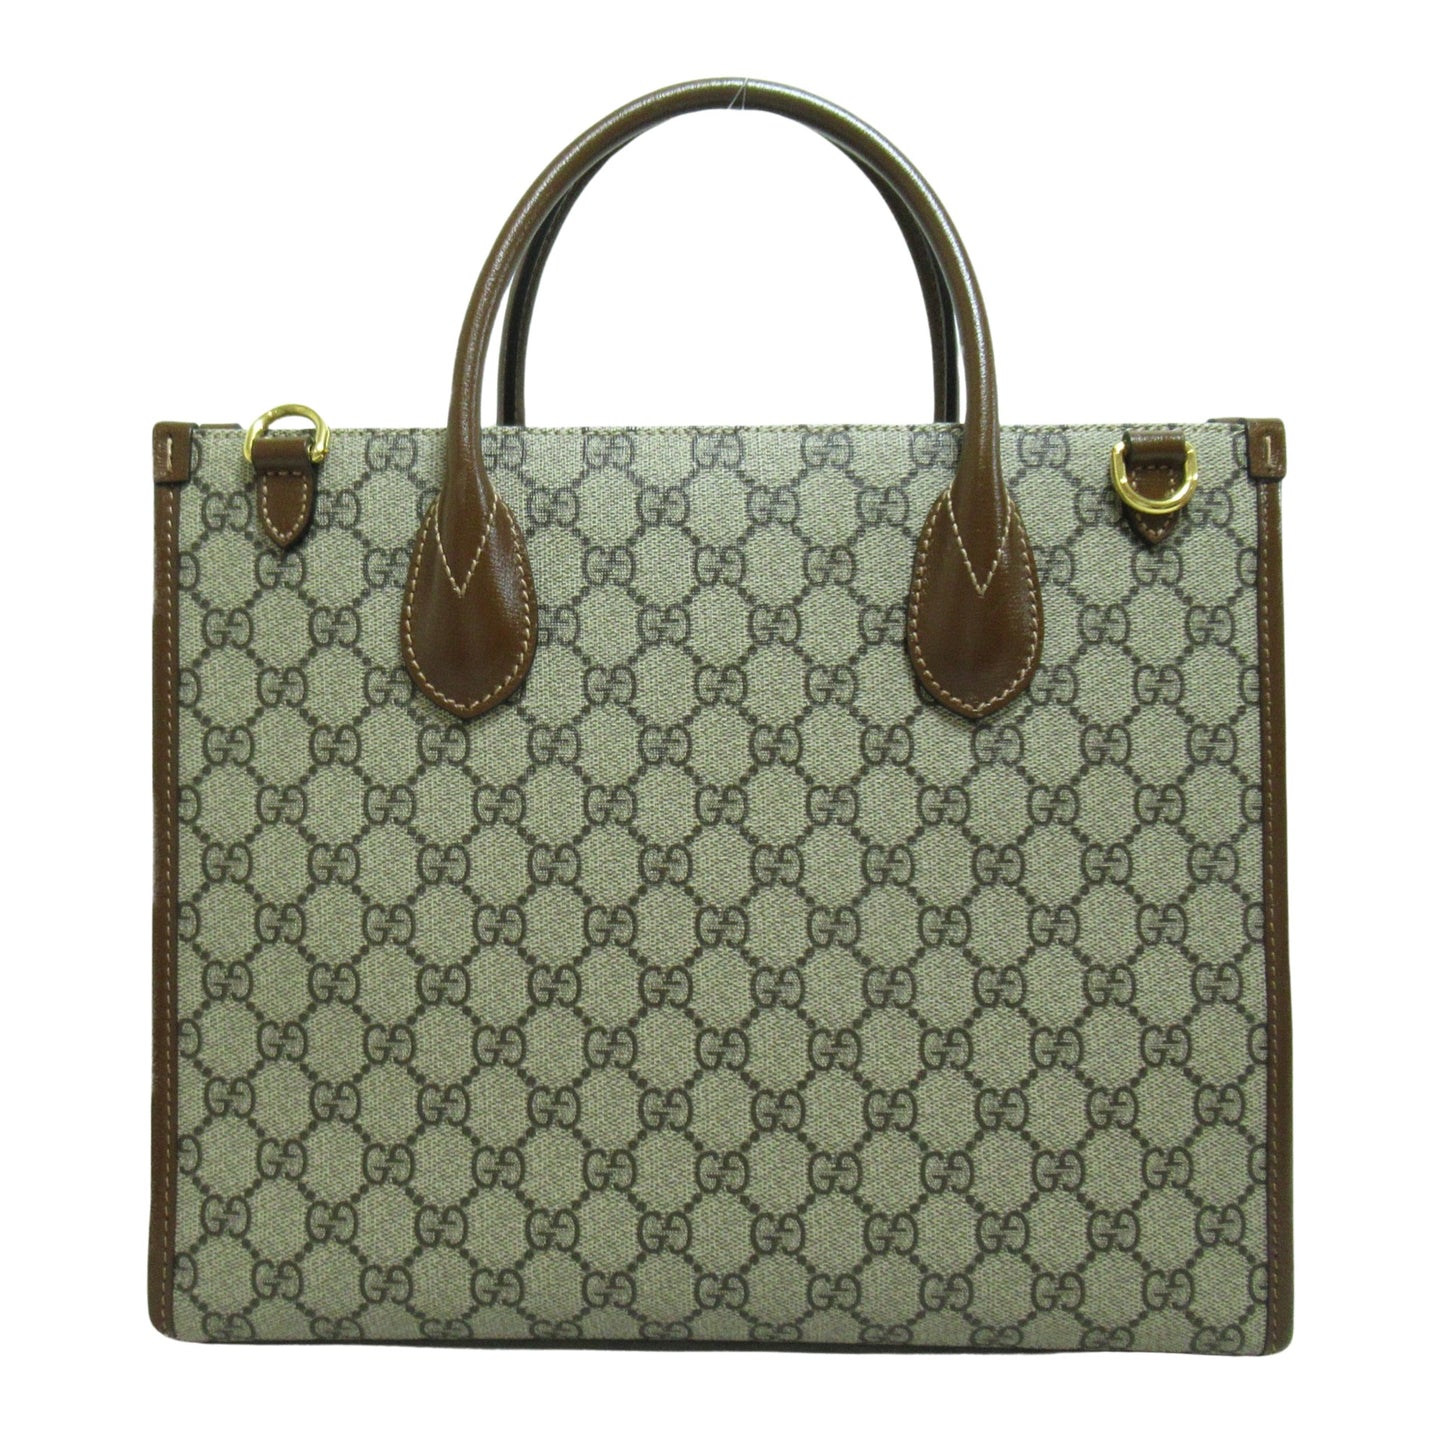 Gucci Women's Beige Canvas Tote Bag with Timeless Style and Functionality in Beige